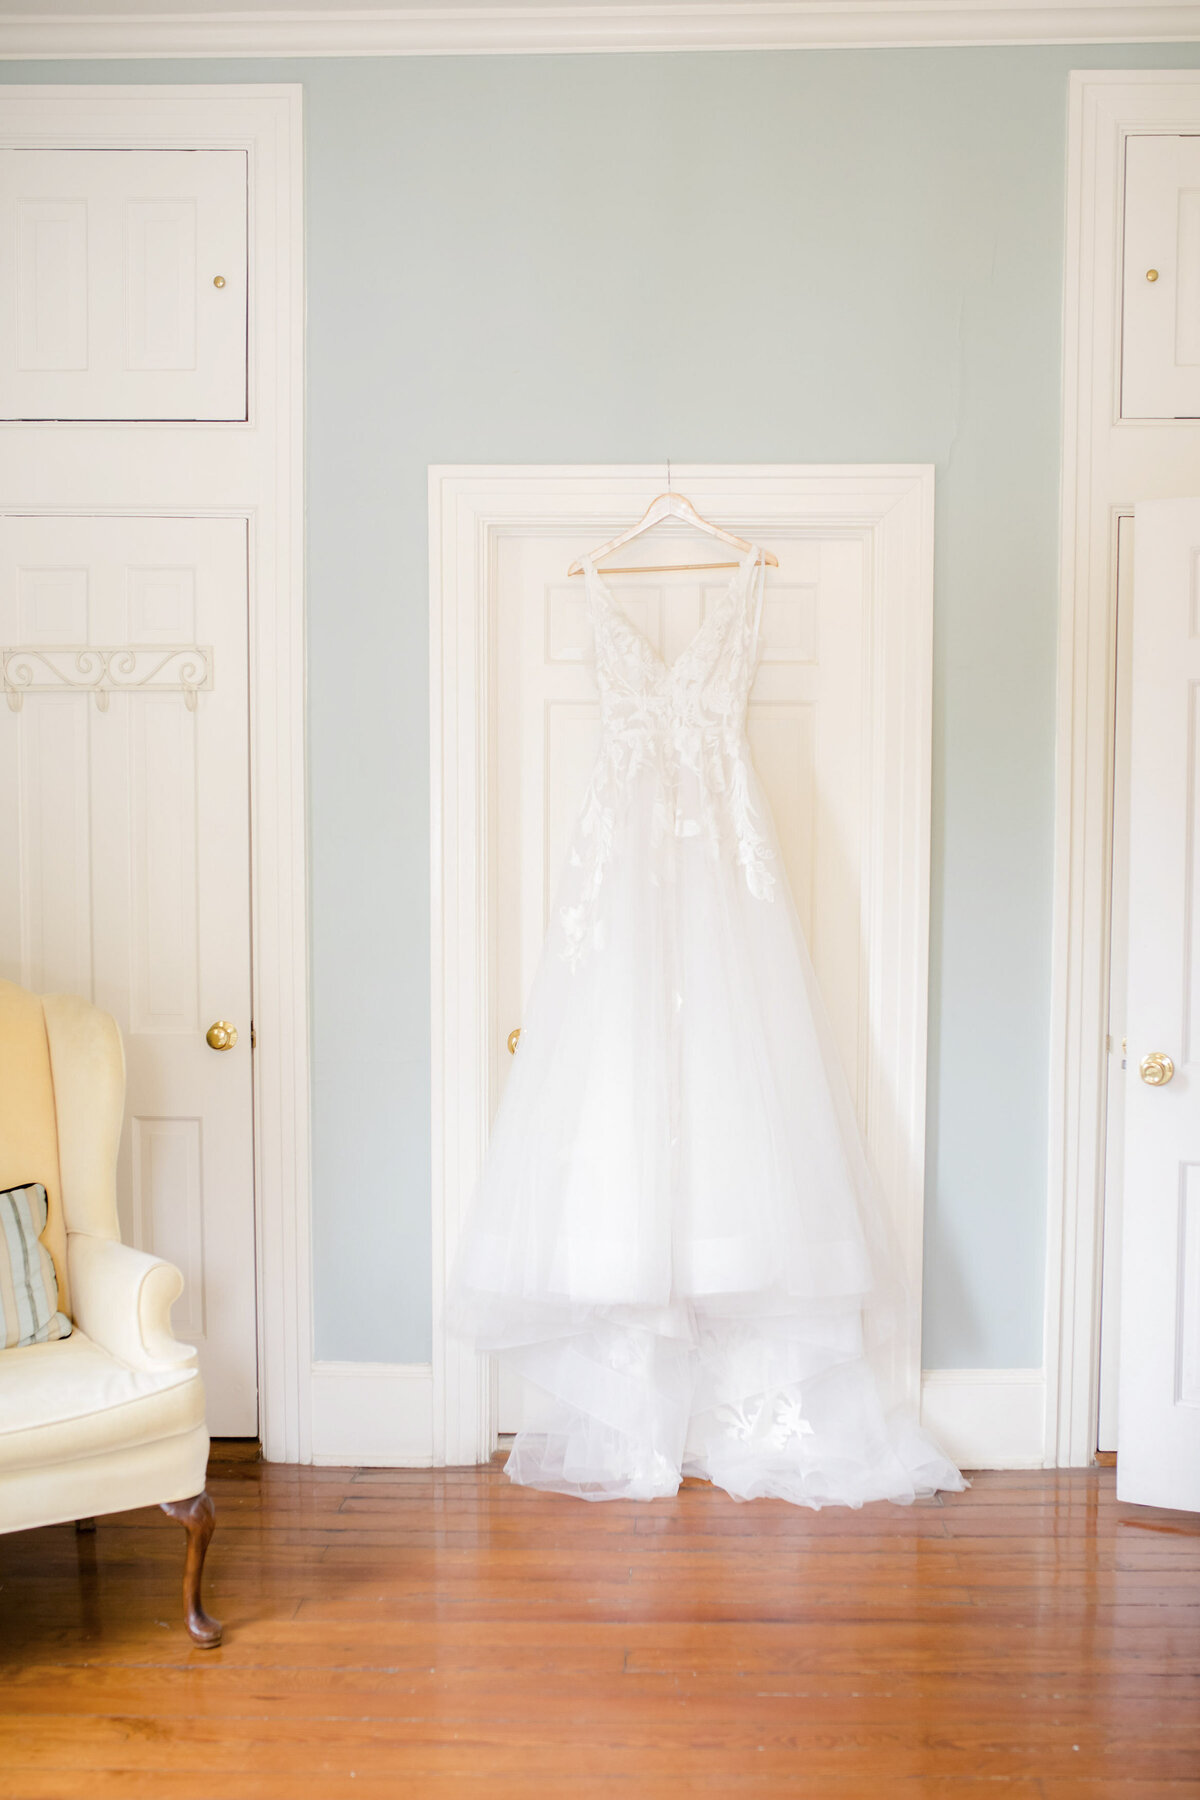 Wedding dress hanging in the bridal suite